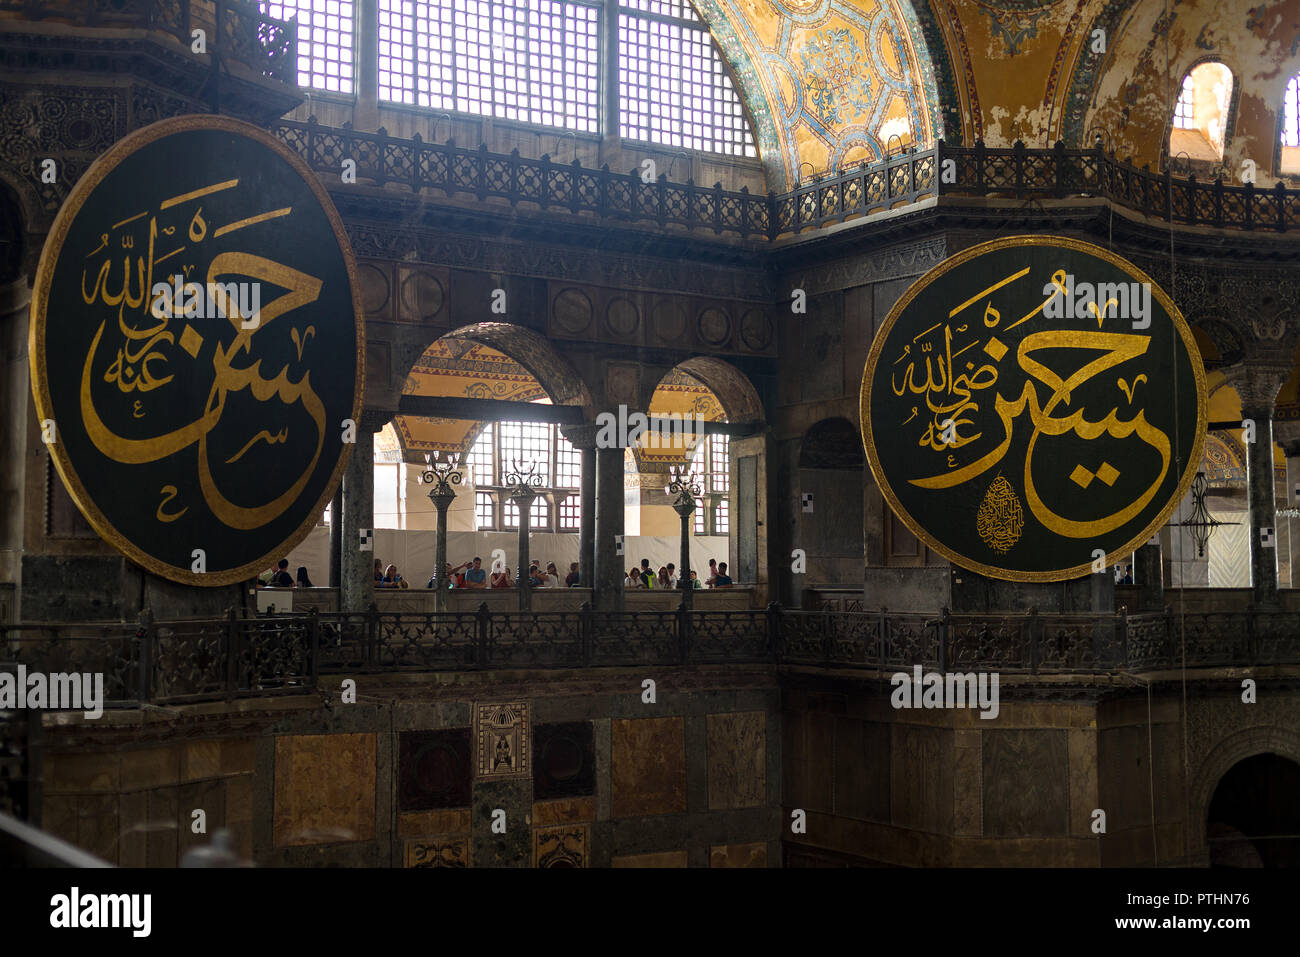 View of the 1st floor large calligraphic roundel panes with tourists at one of the balconies, Hagia Sophia museum, Istanbul, Turkey Stock Photo